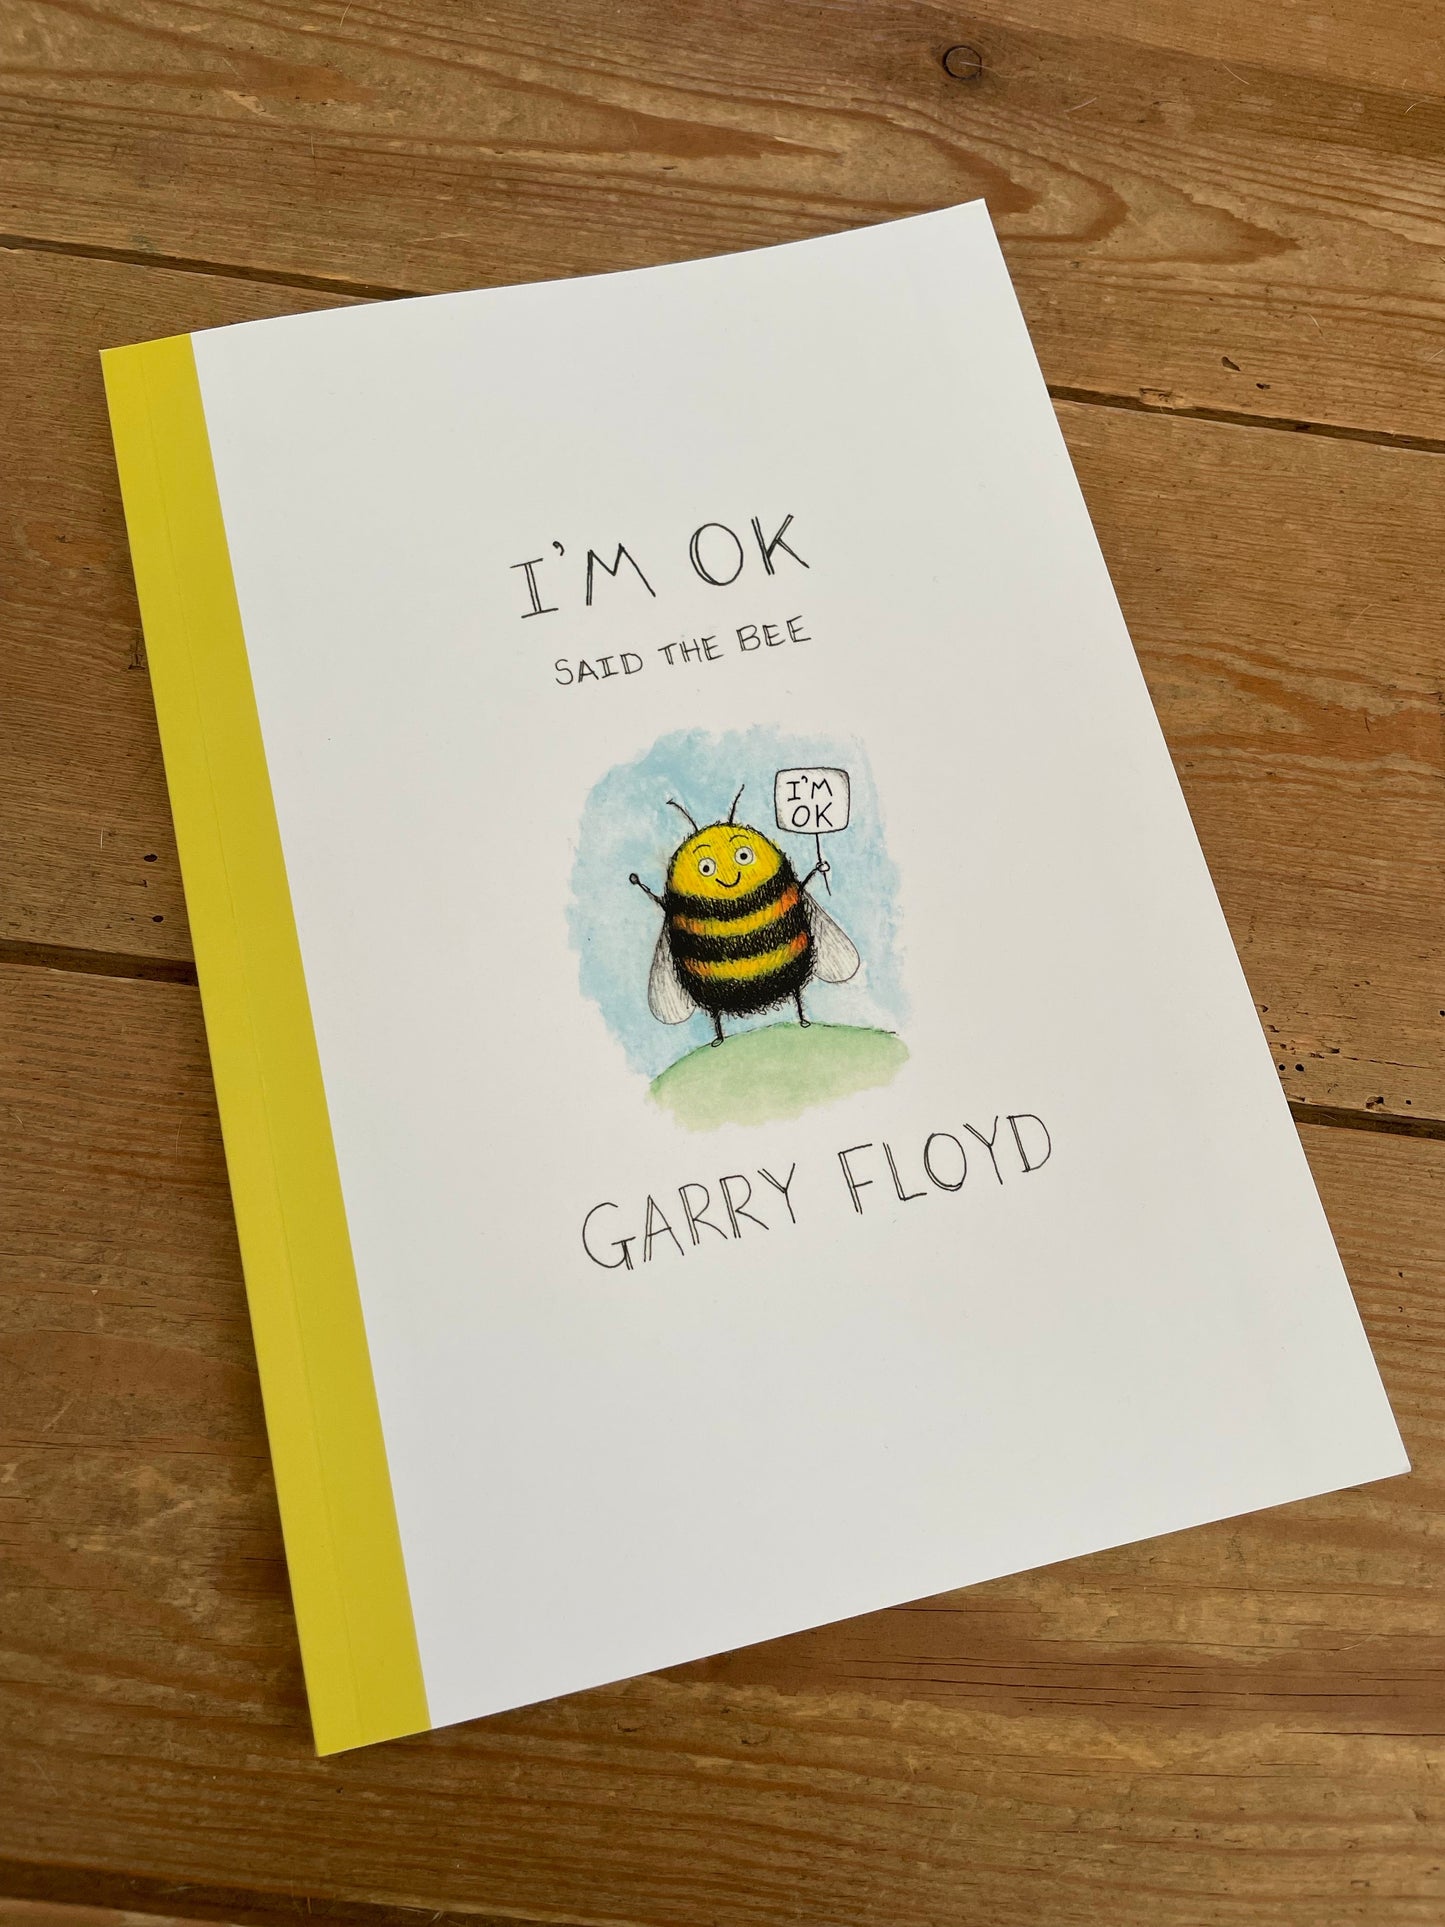 I’m ok said the bee special edition volume 1 paperback